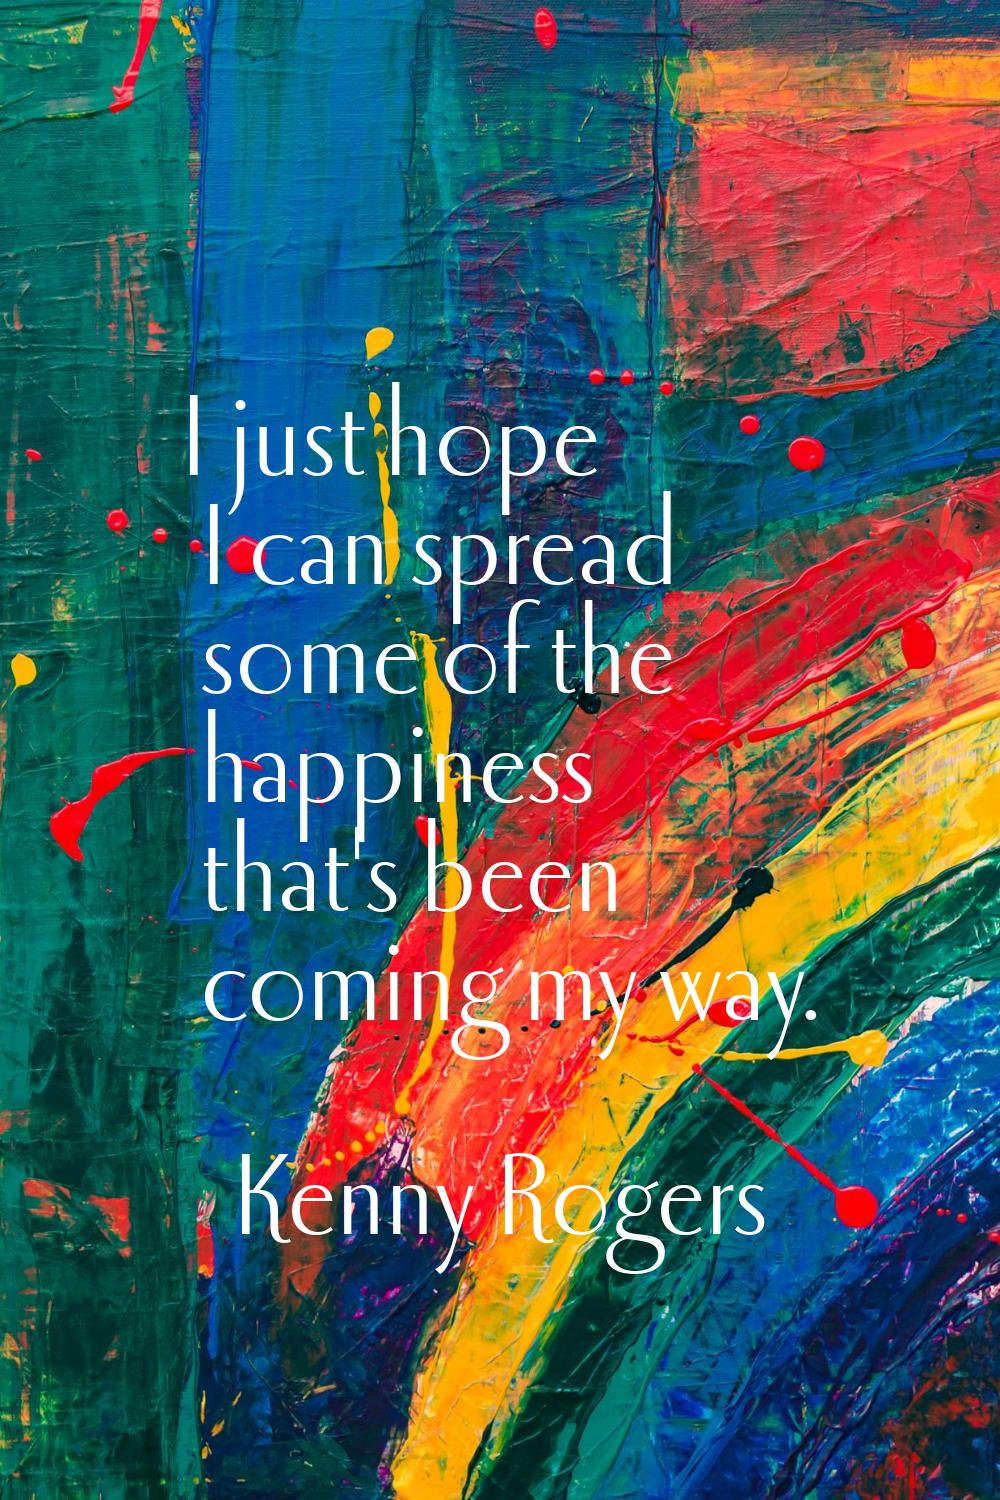 I just hope I can spread some of the happiness that's been coming my way.